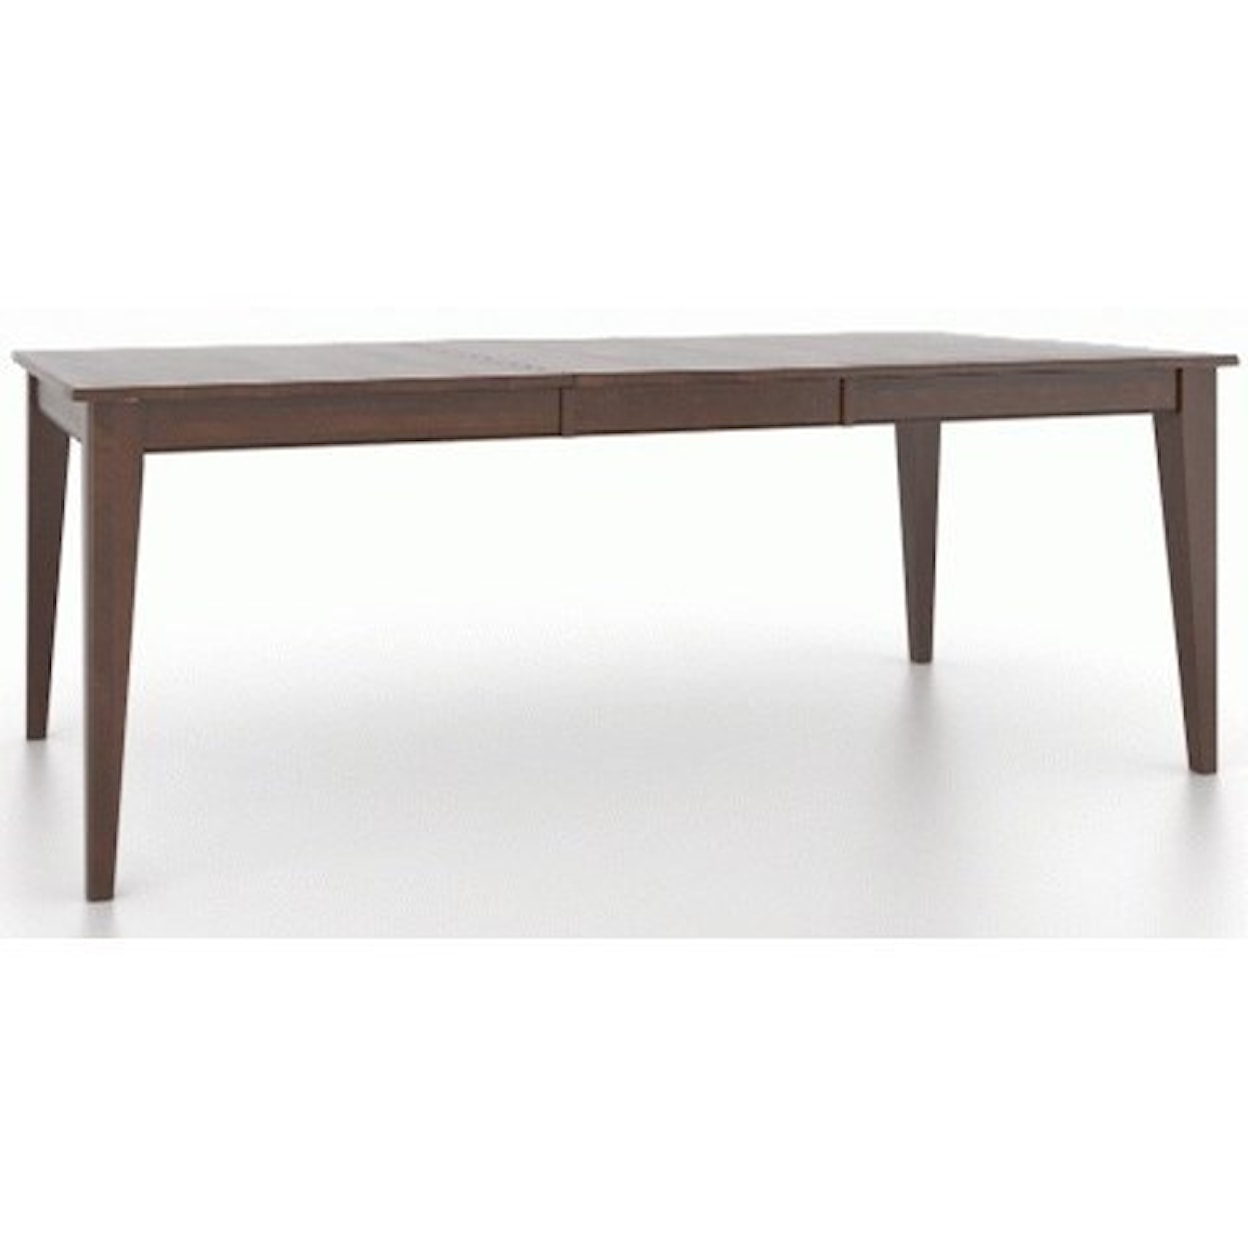 Canadel Gourmet Customizable Rect. Table w/ Leaf